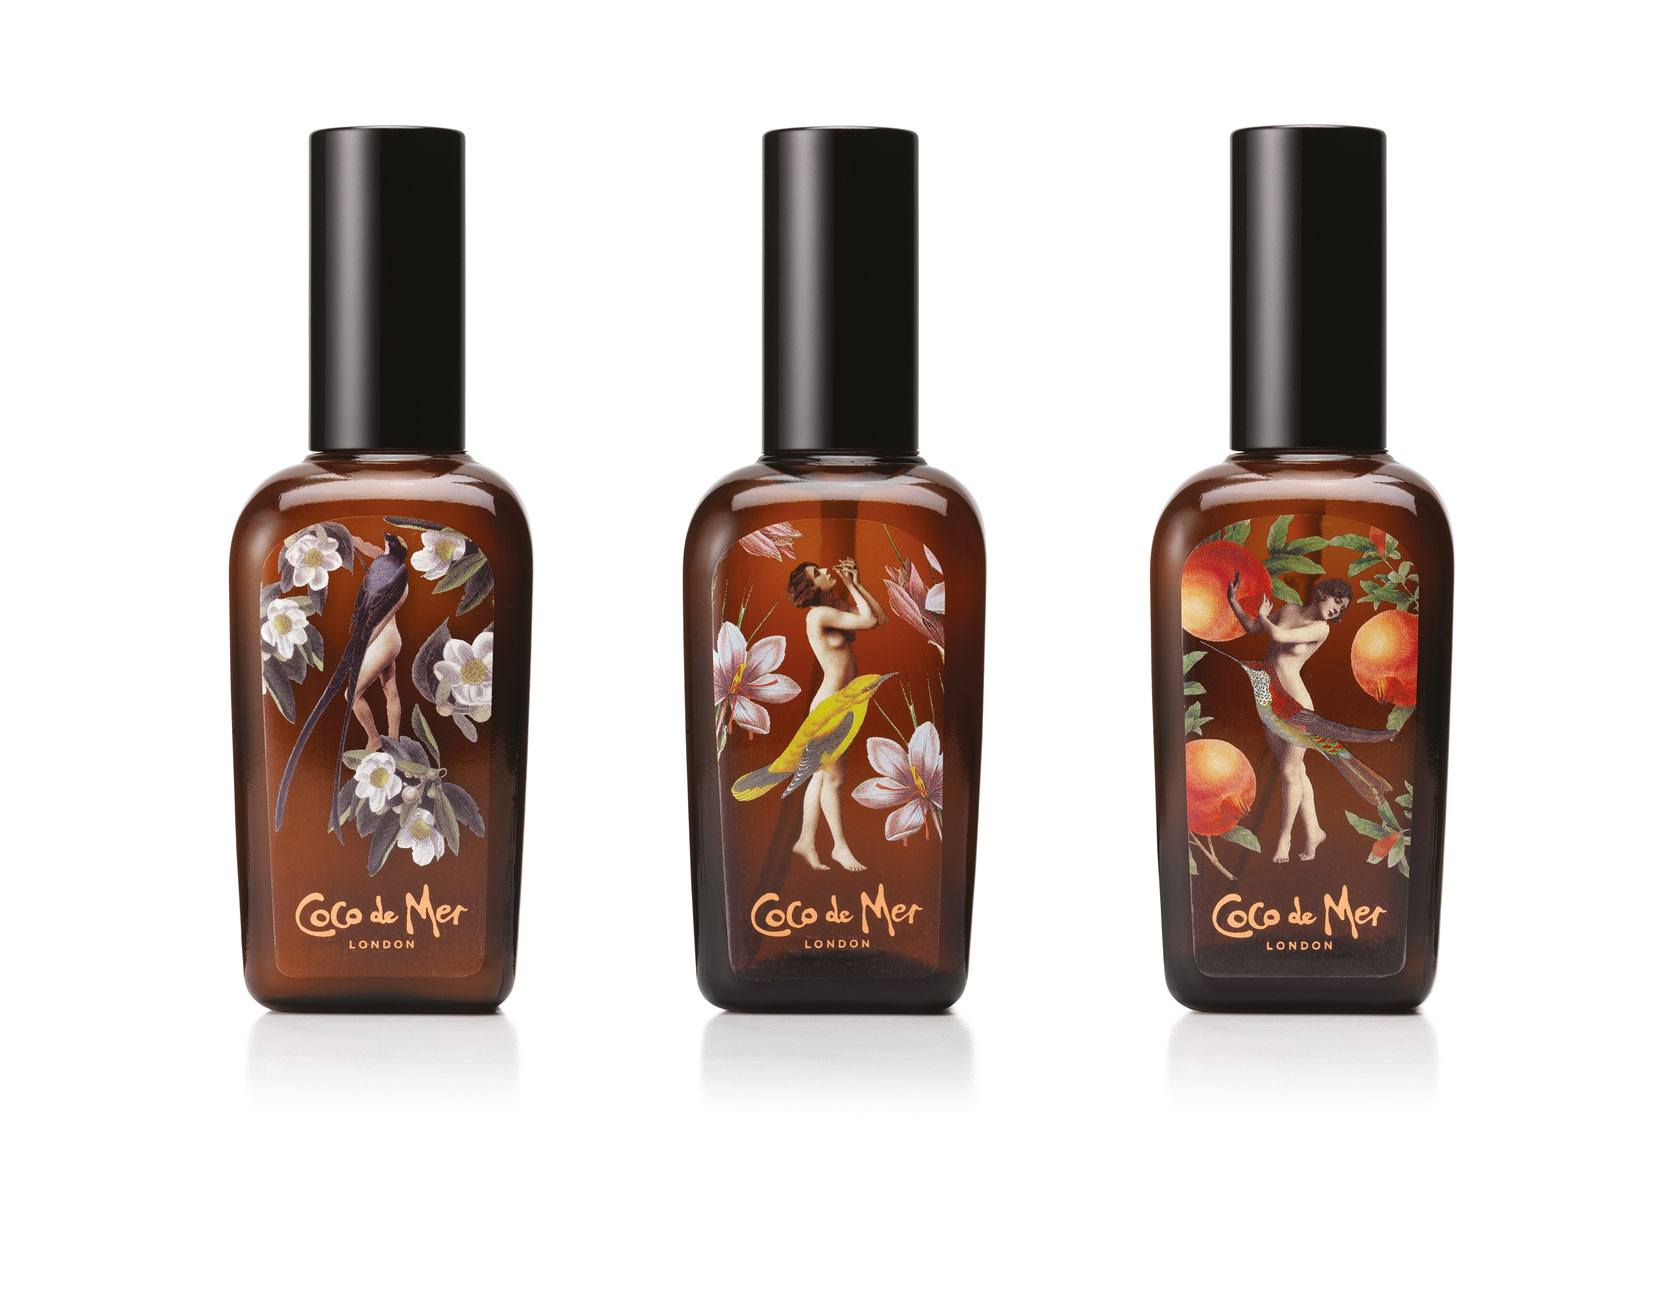 Coco de Mer lubricant bottles designed by WMH Pleasures Collection